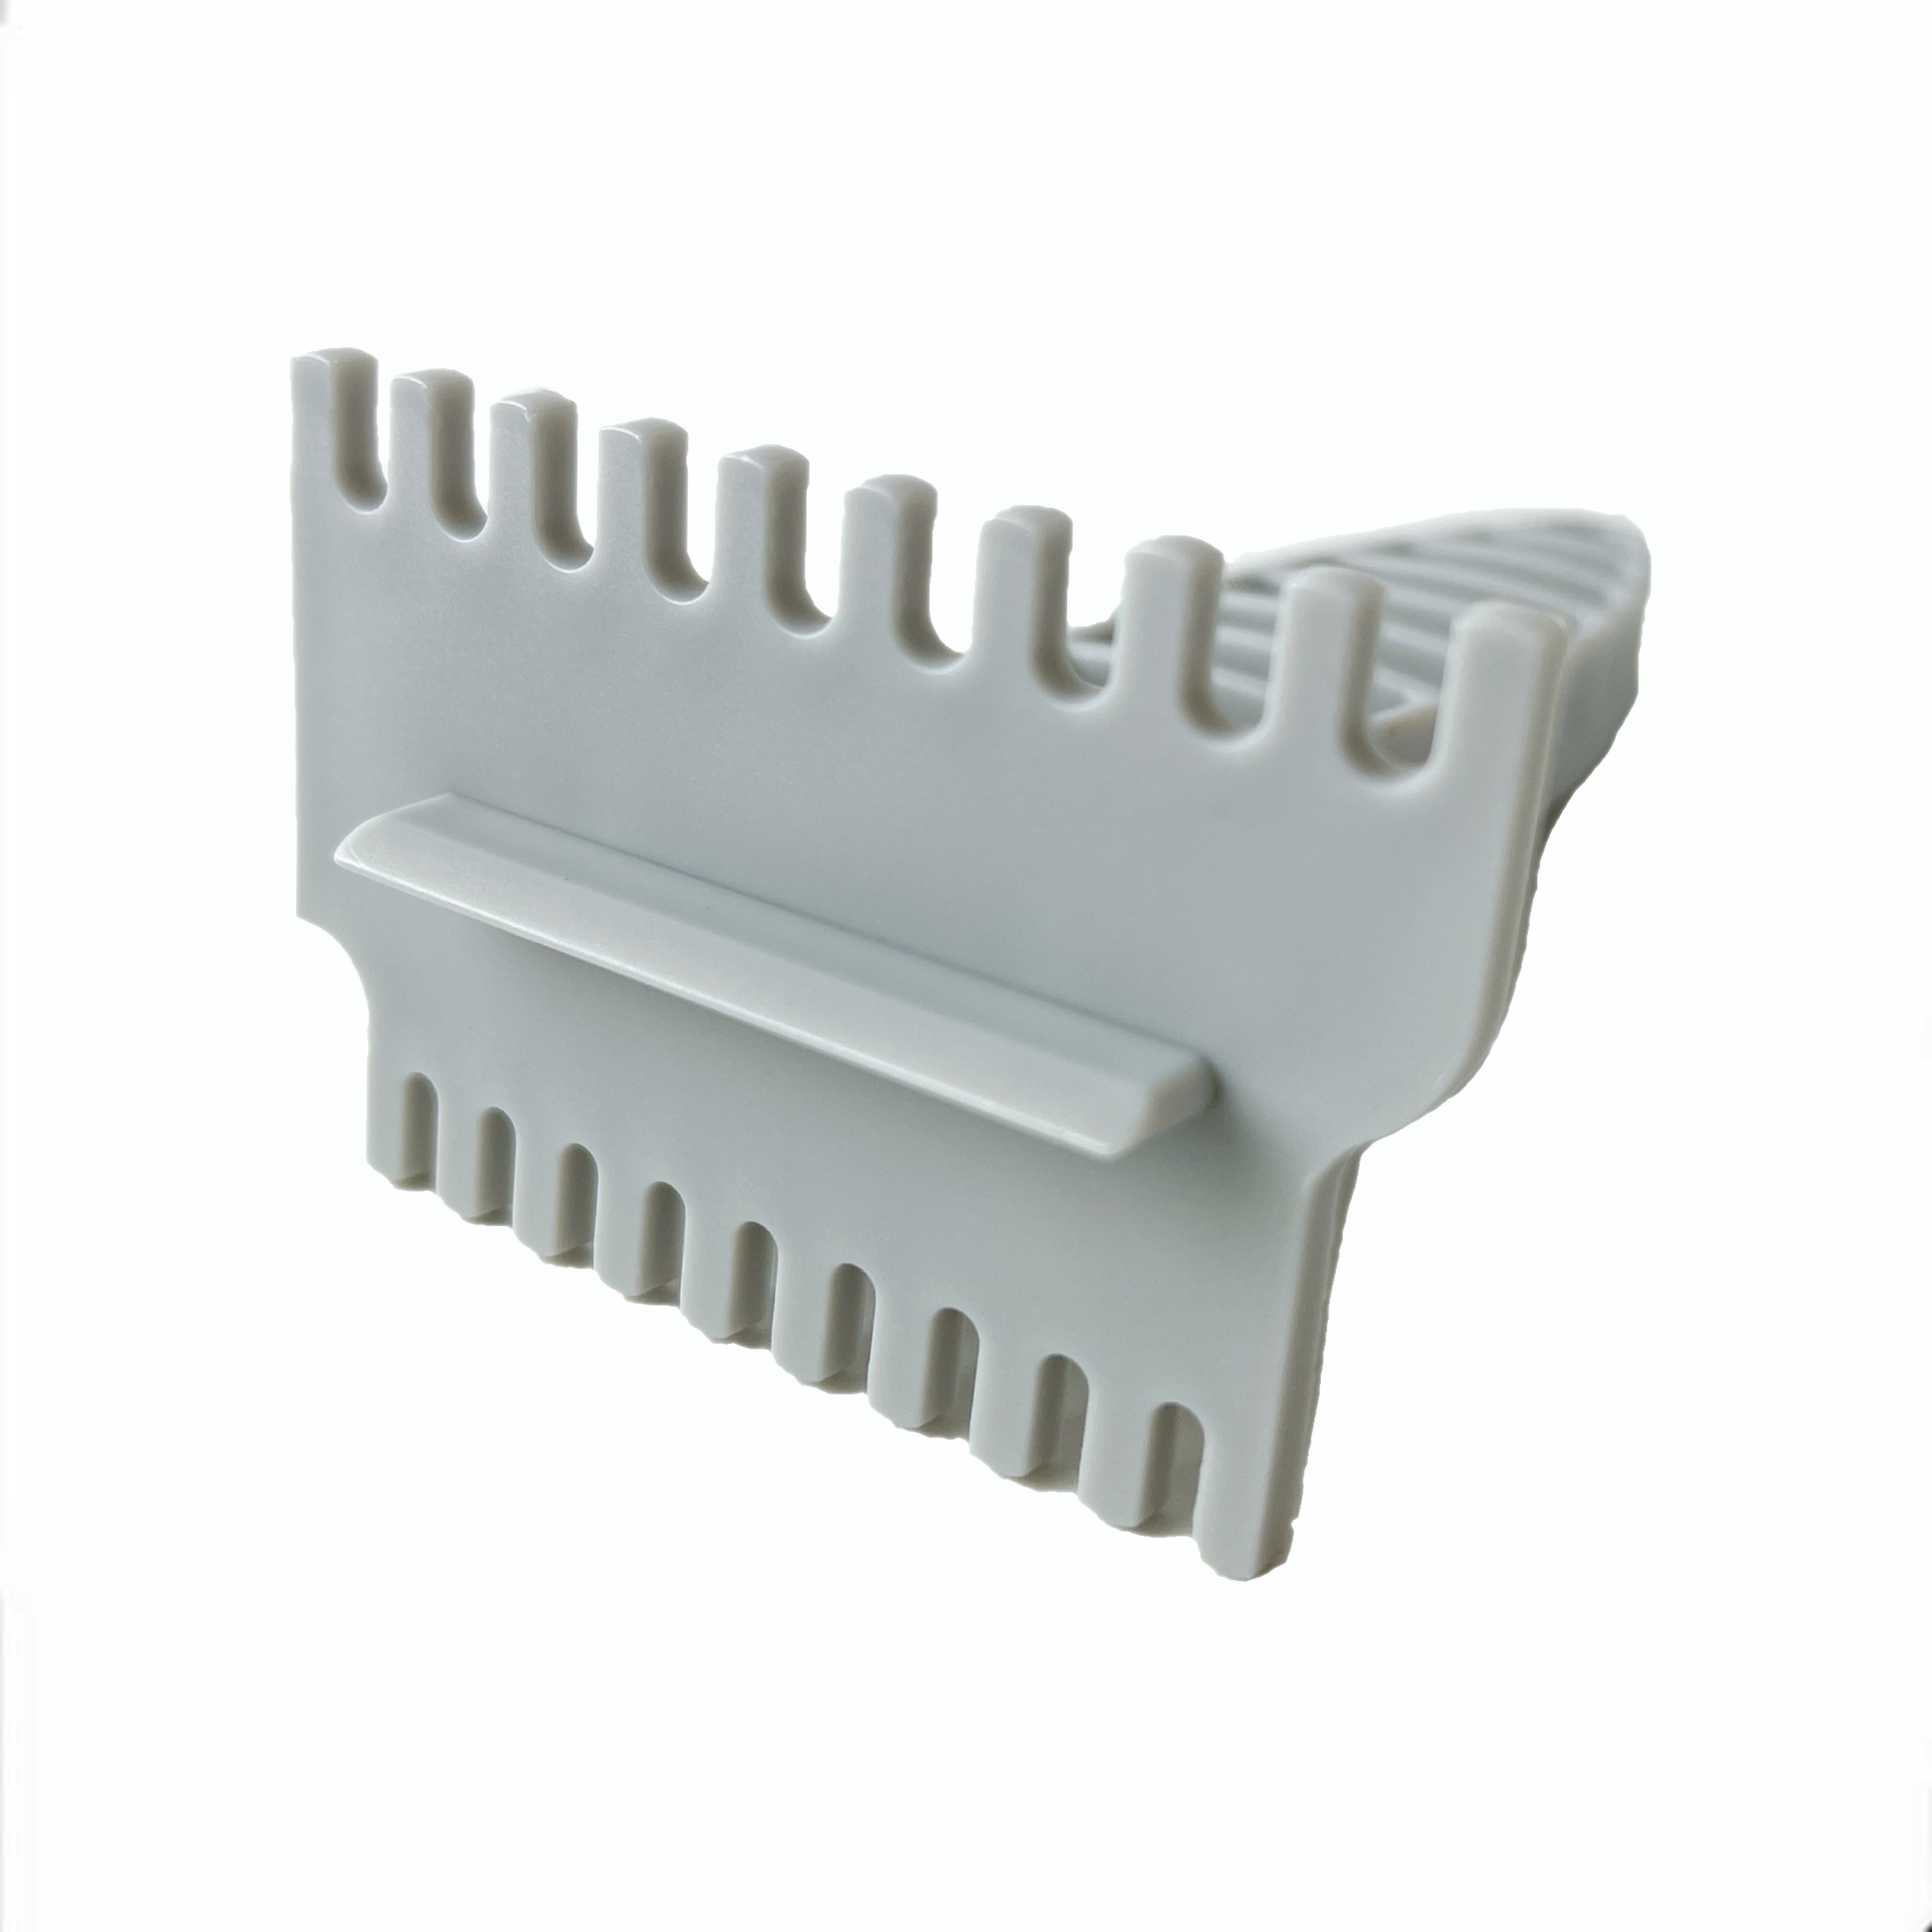 QE-012F Plastic Queen Excluder Cleaner